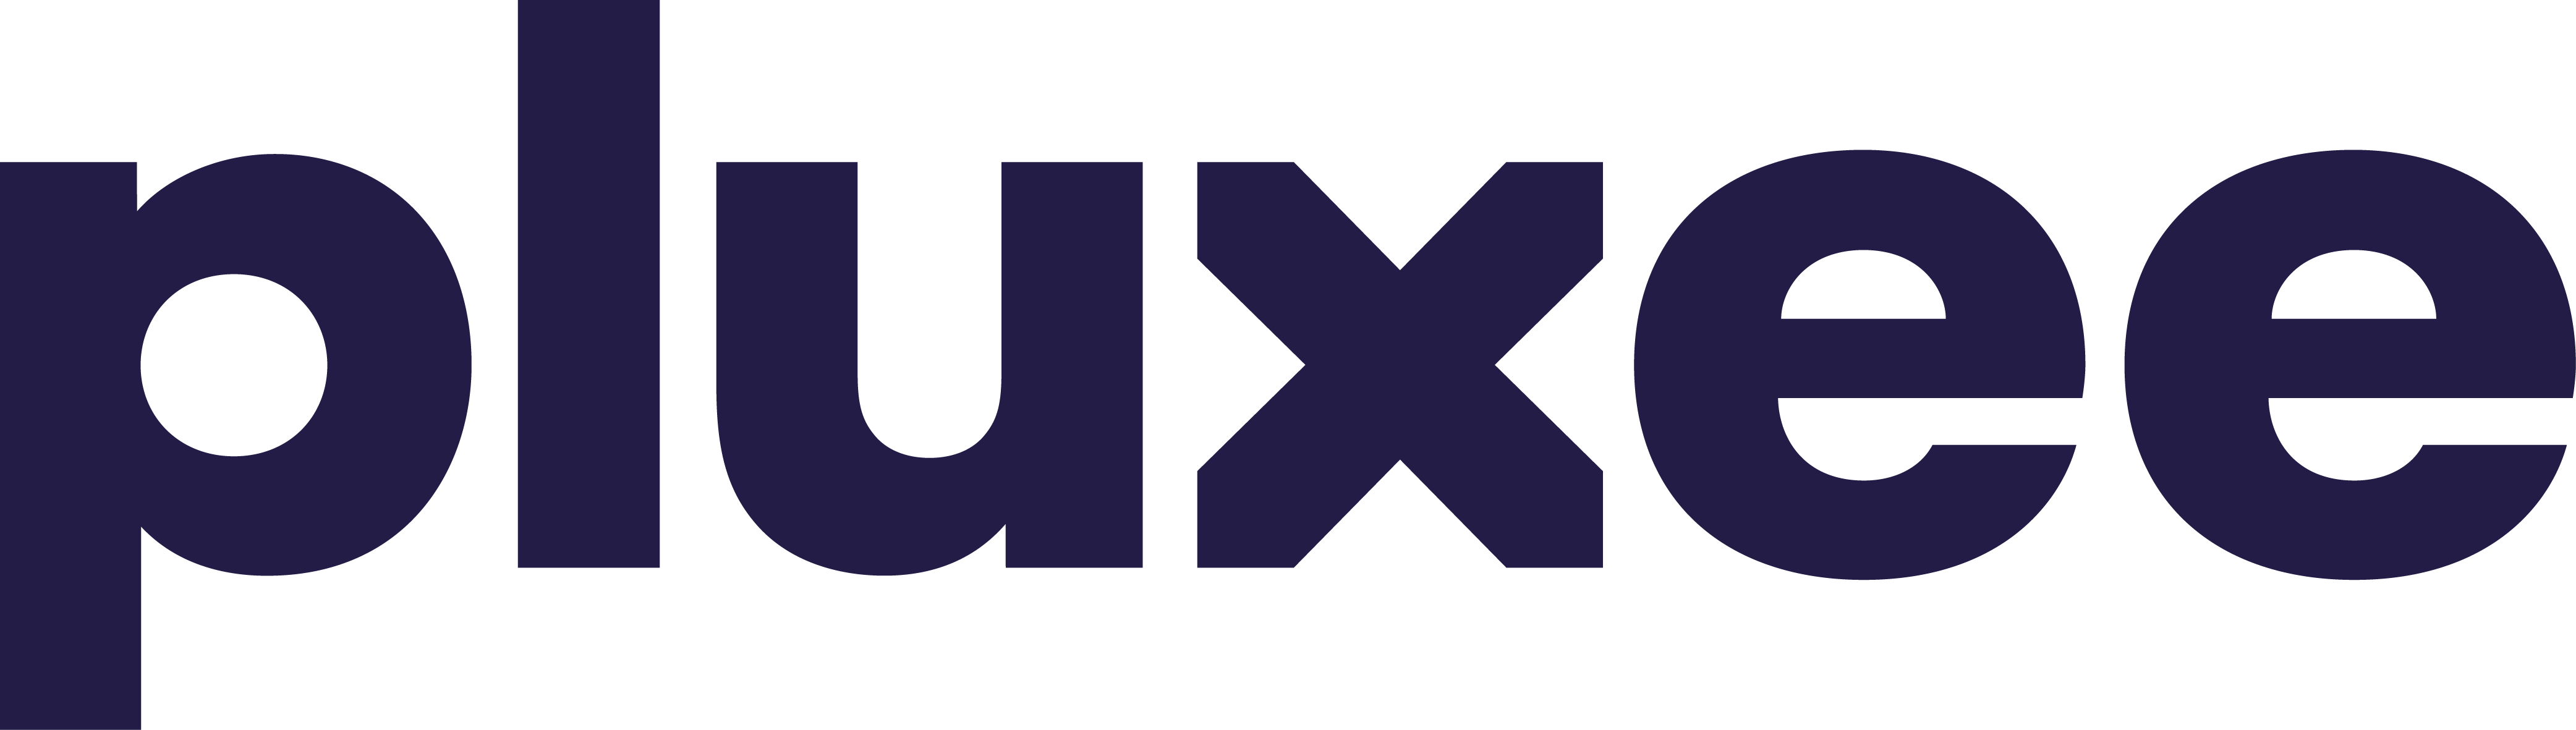 Sodexo Benefits and Rewards Services becomes Pluxee, the new employee ...